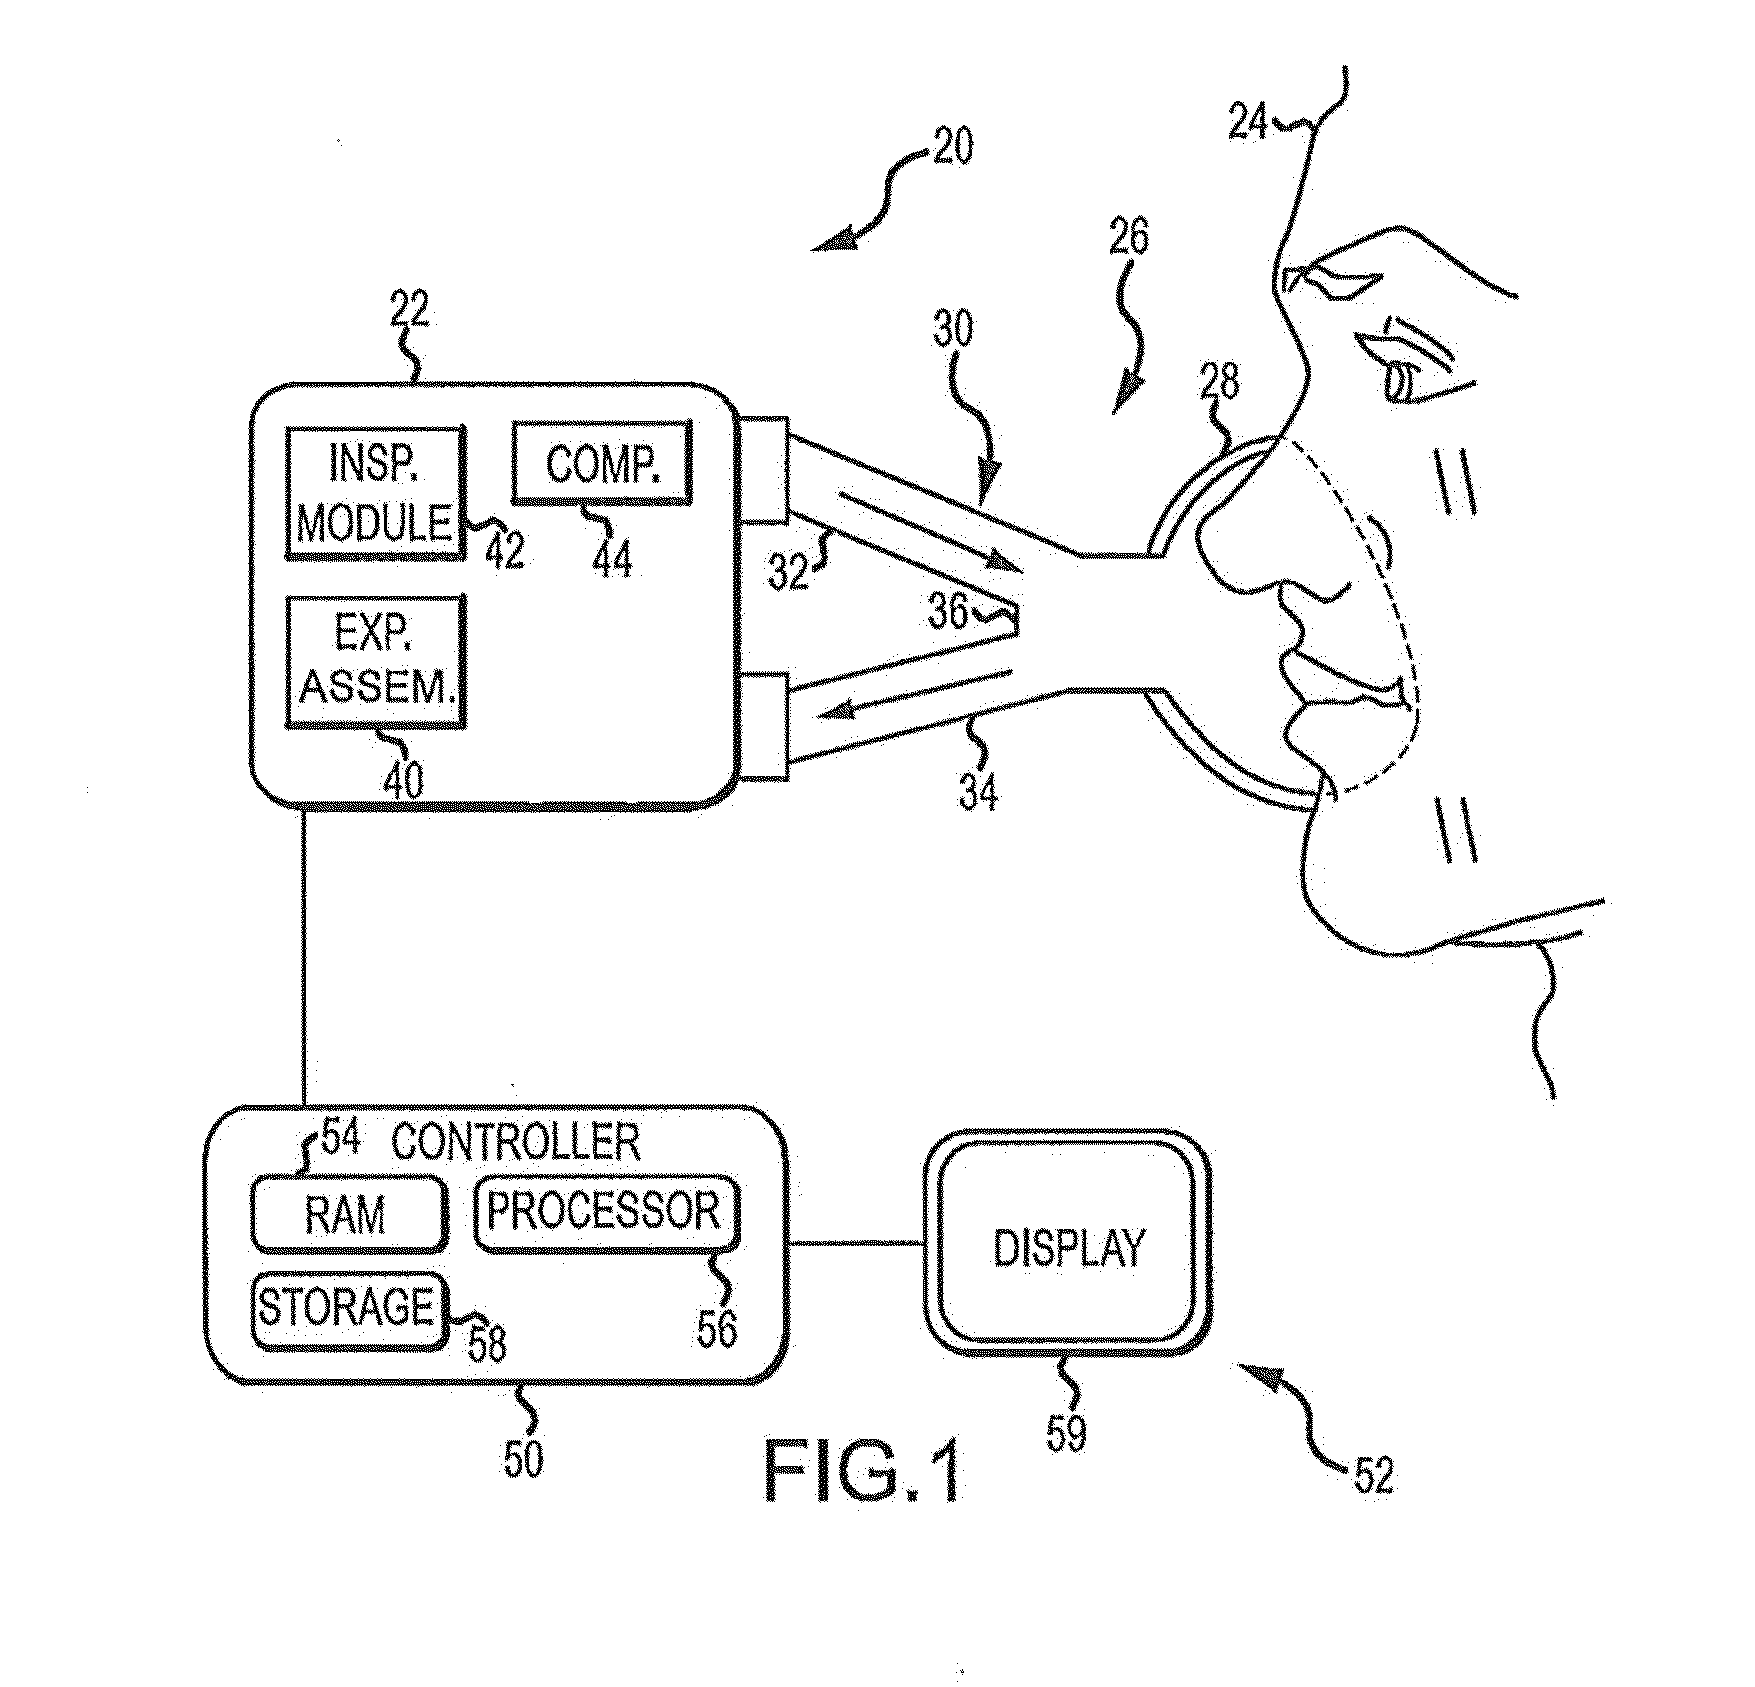 Exhalation Valve Assembly With Integrated Filter